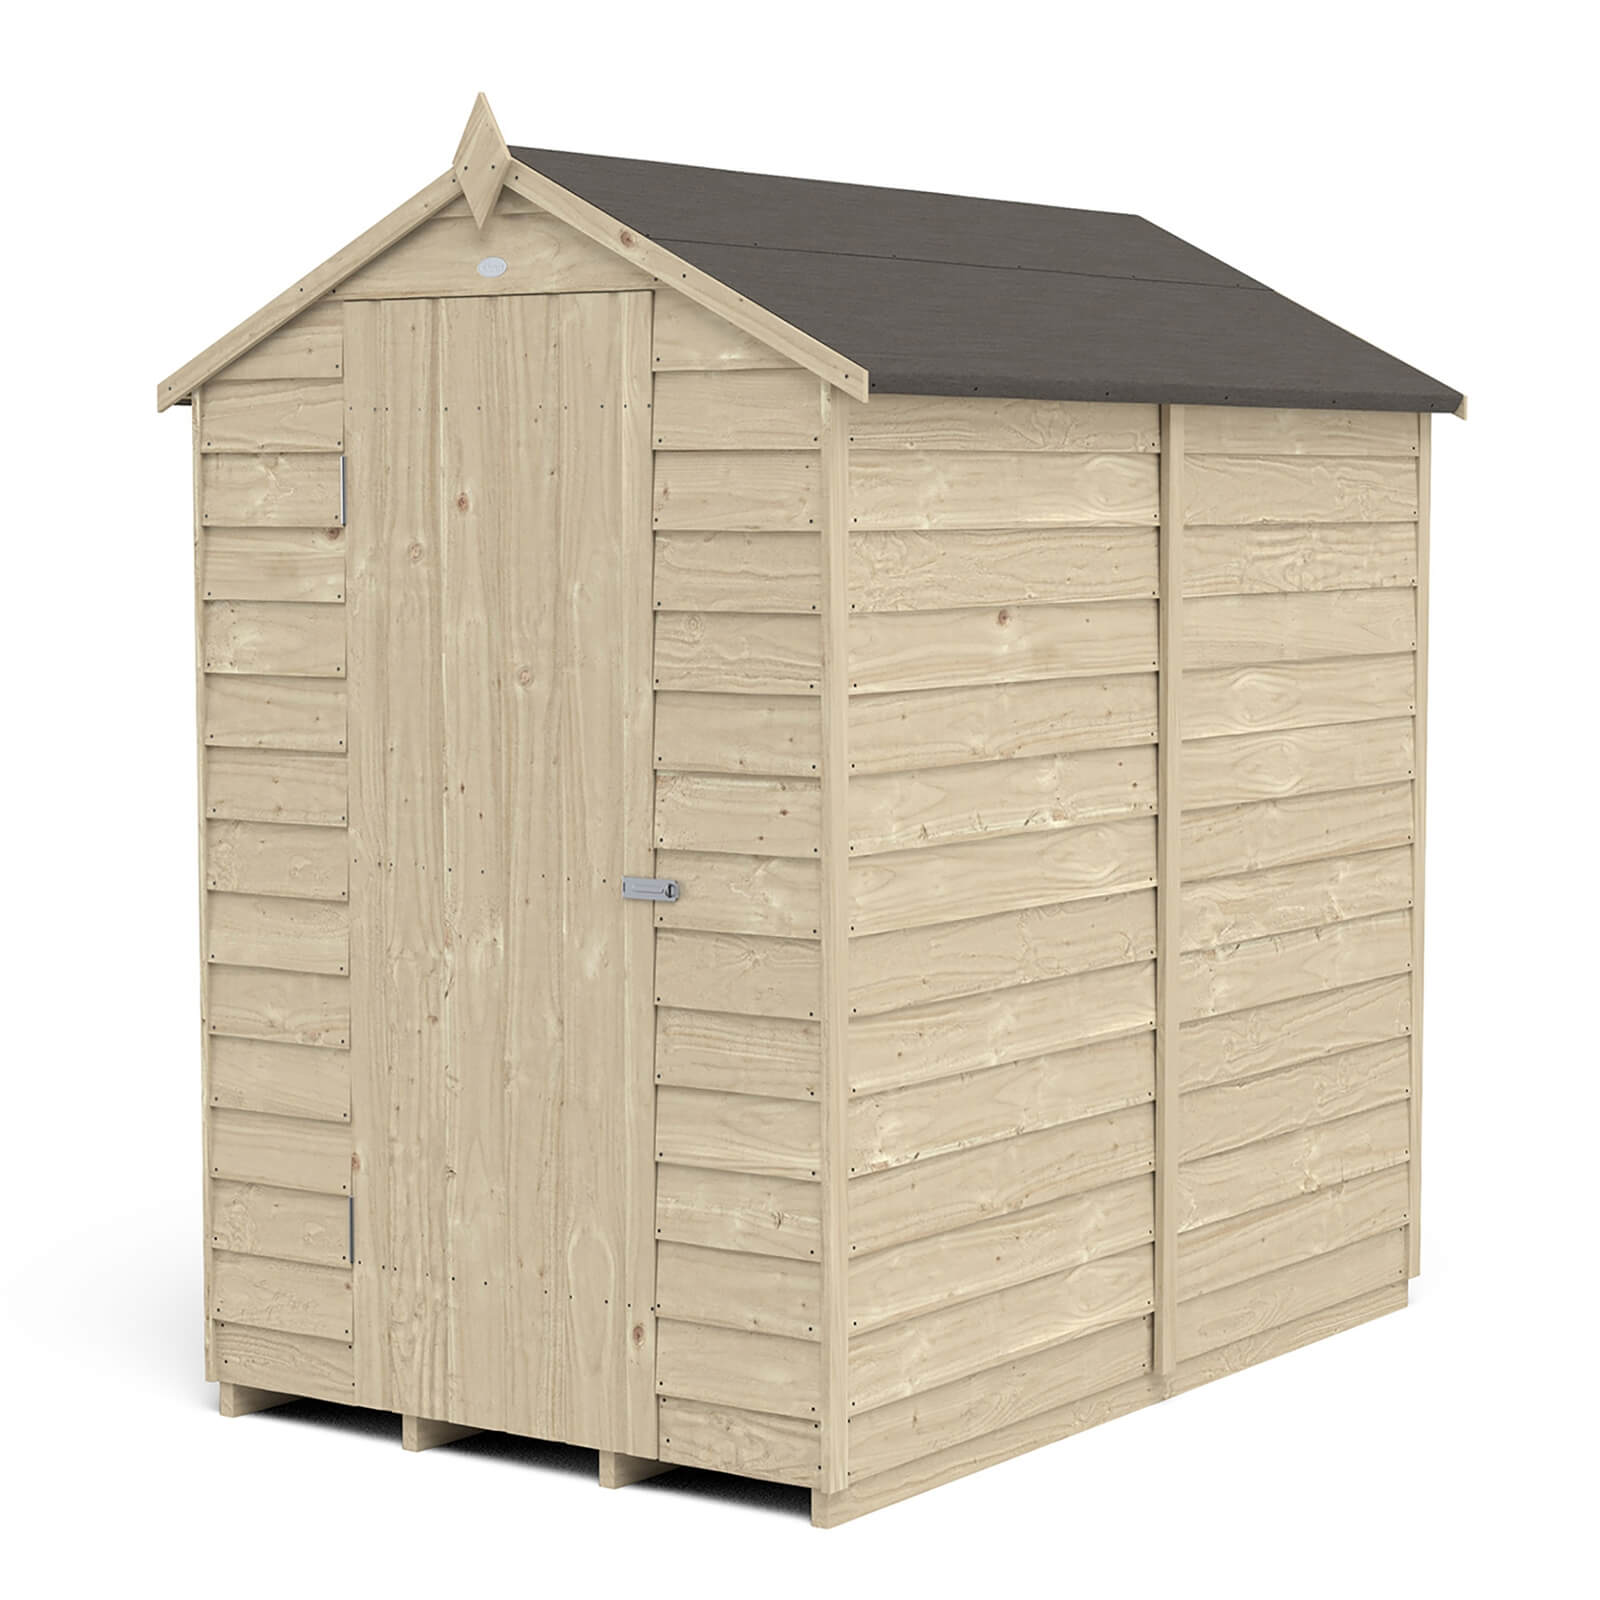 Forest 6 x 4ft Overlap Pressure Treated Apex Shed - No Window incl. Installation